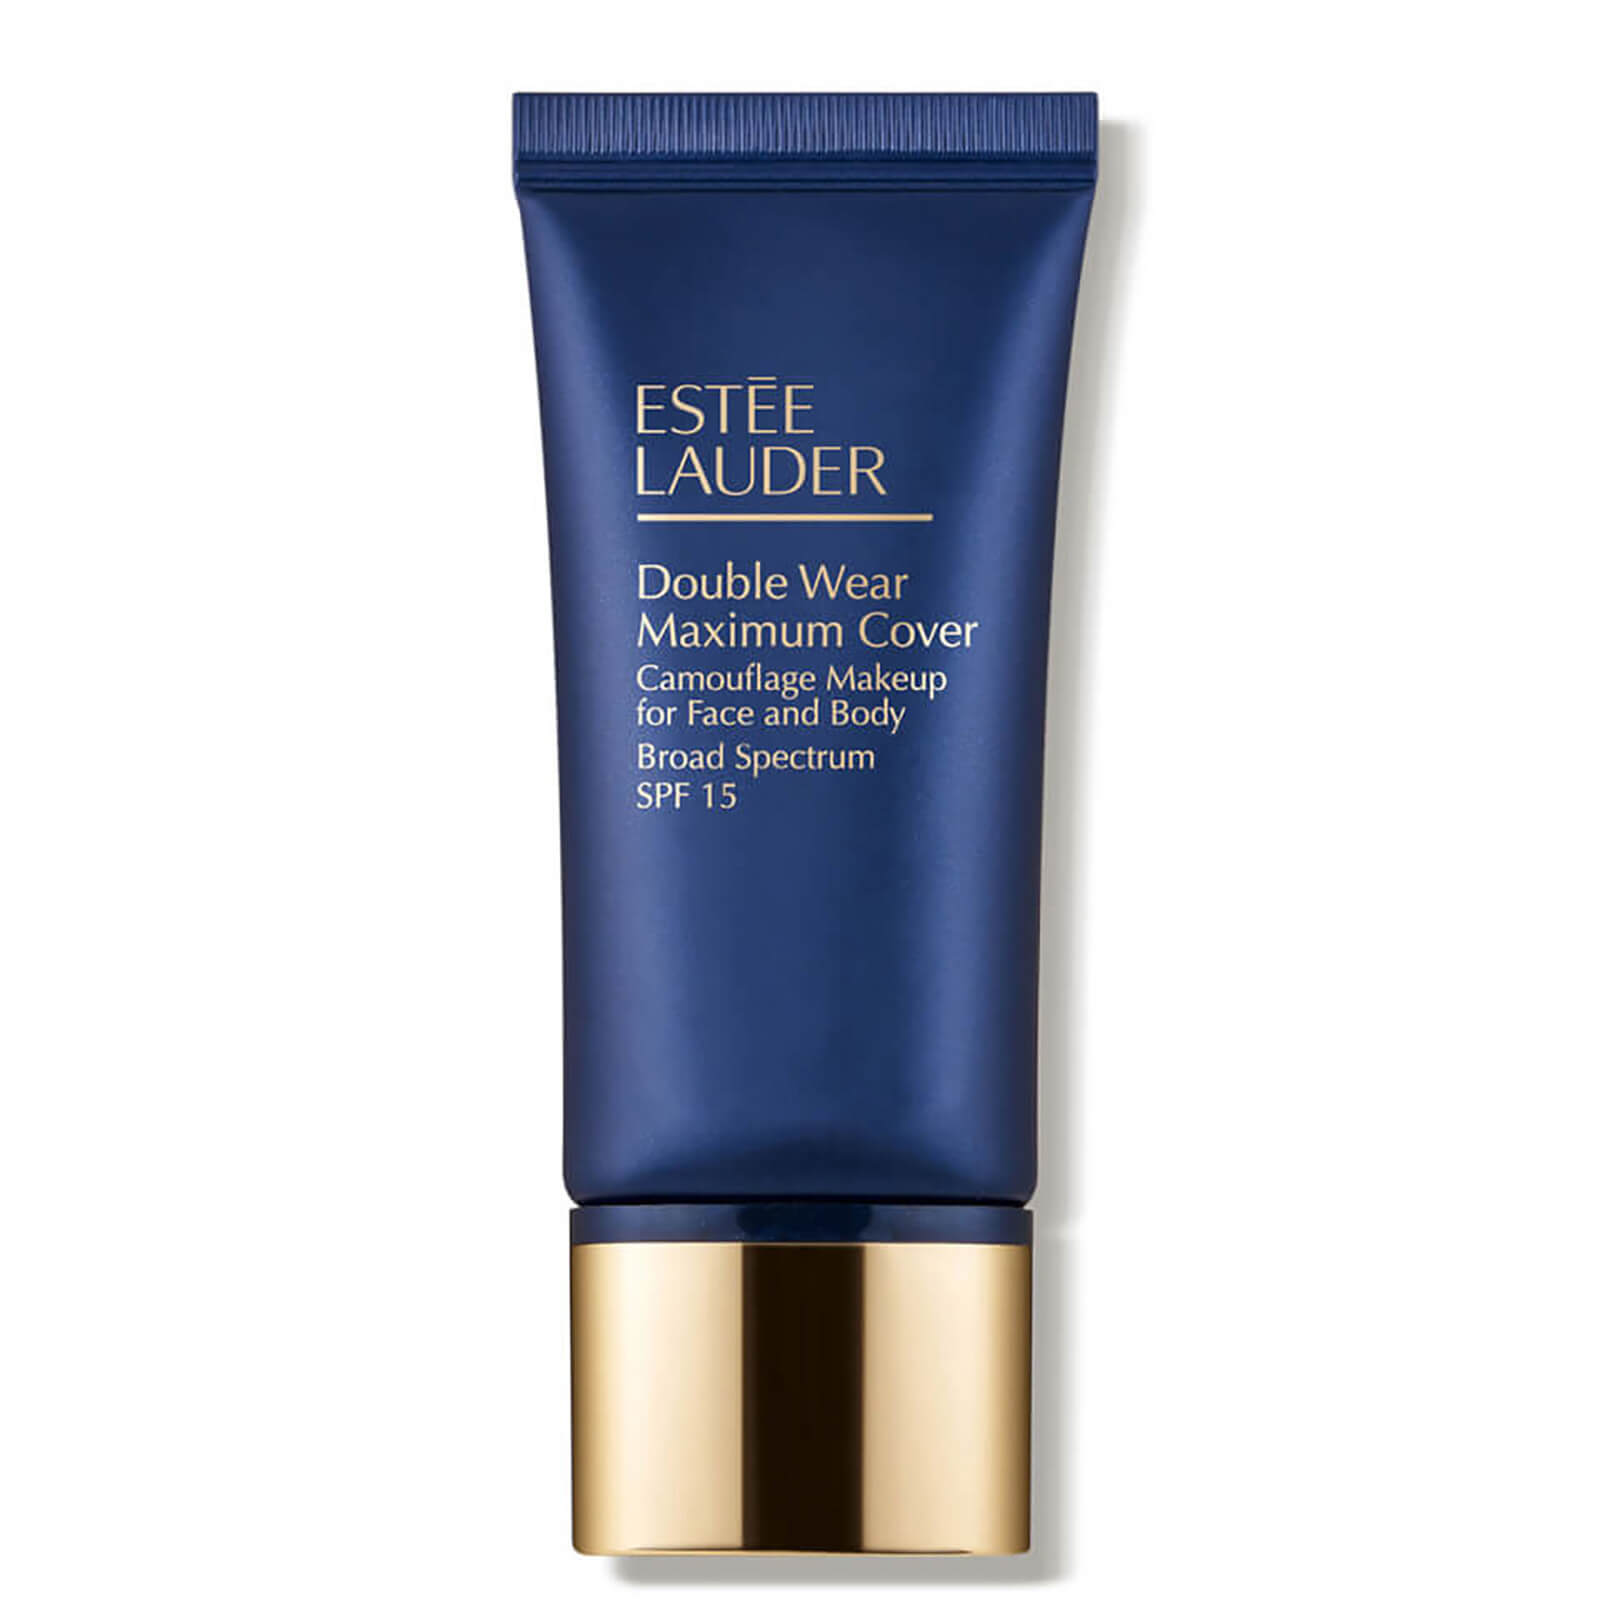 Estée Lauder Double Wear Maximum Cover Camouflage Makeup For Face And Body Spf 15 (1 Oz.) In 1n1 Ivory Nude